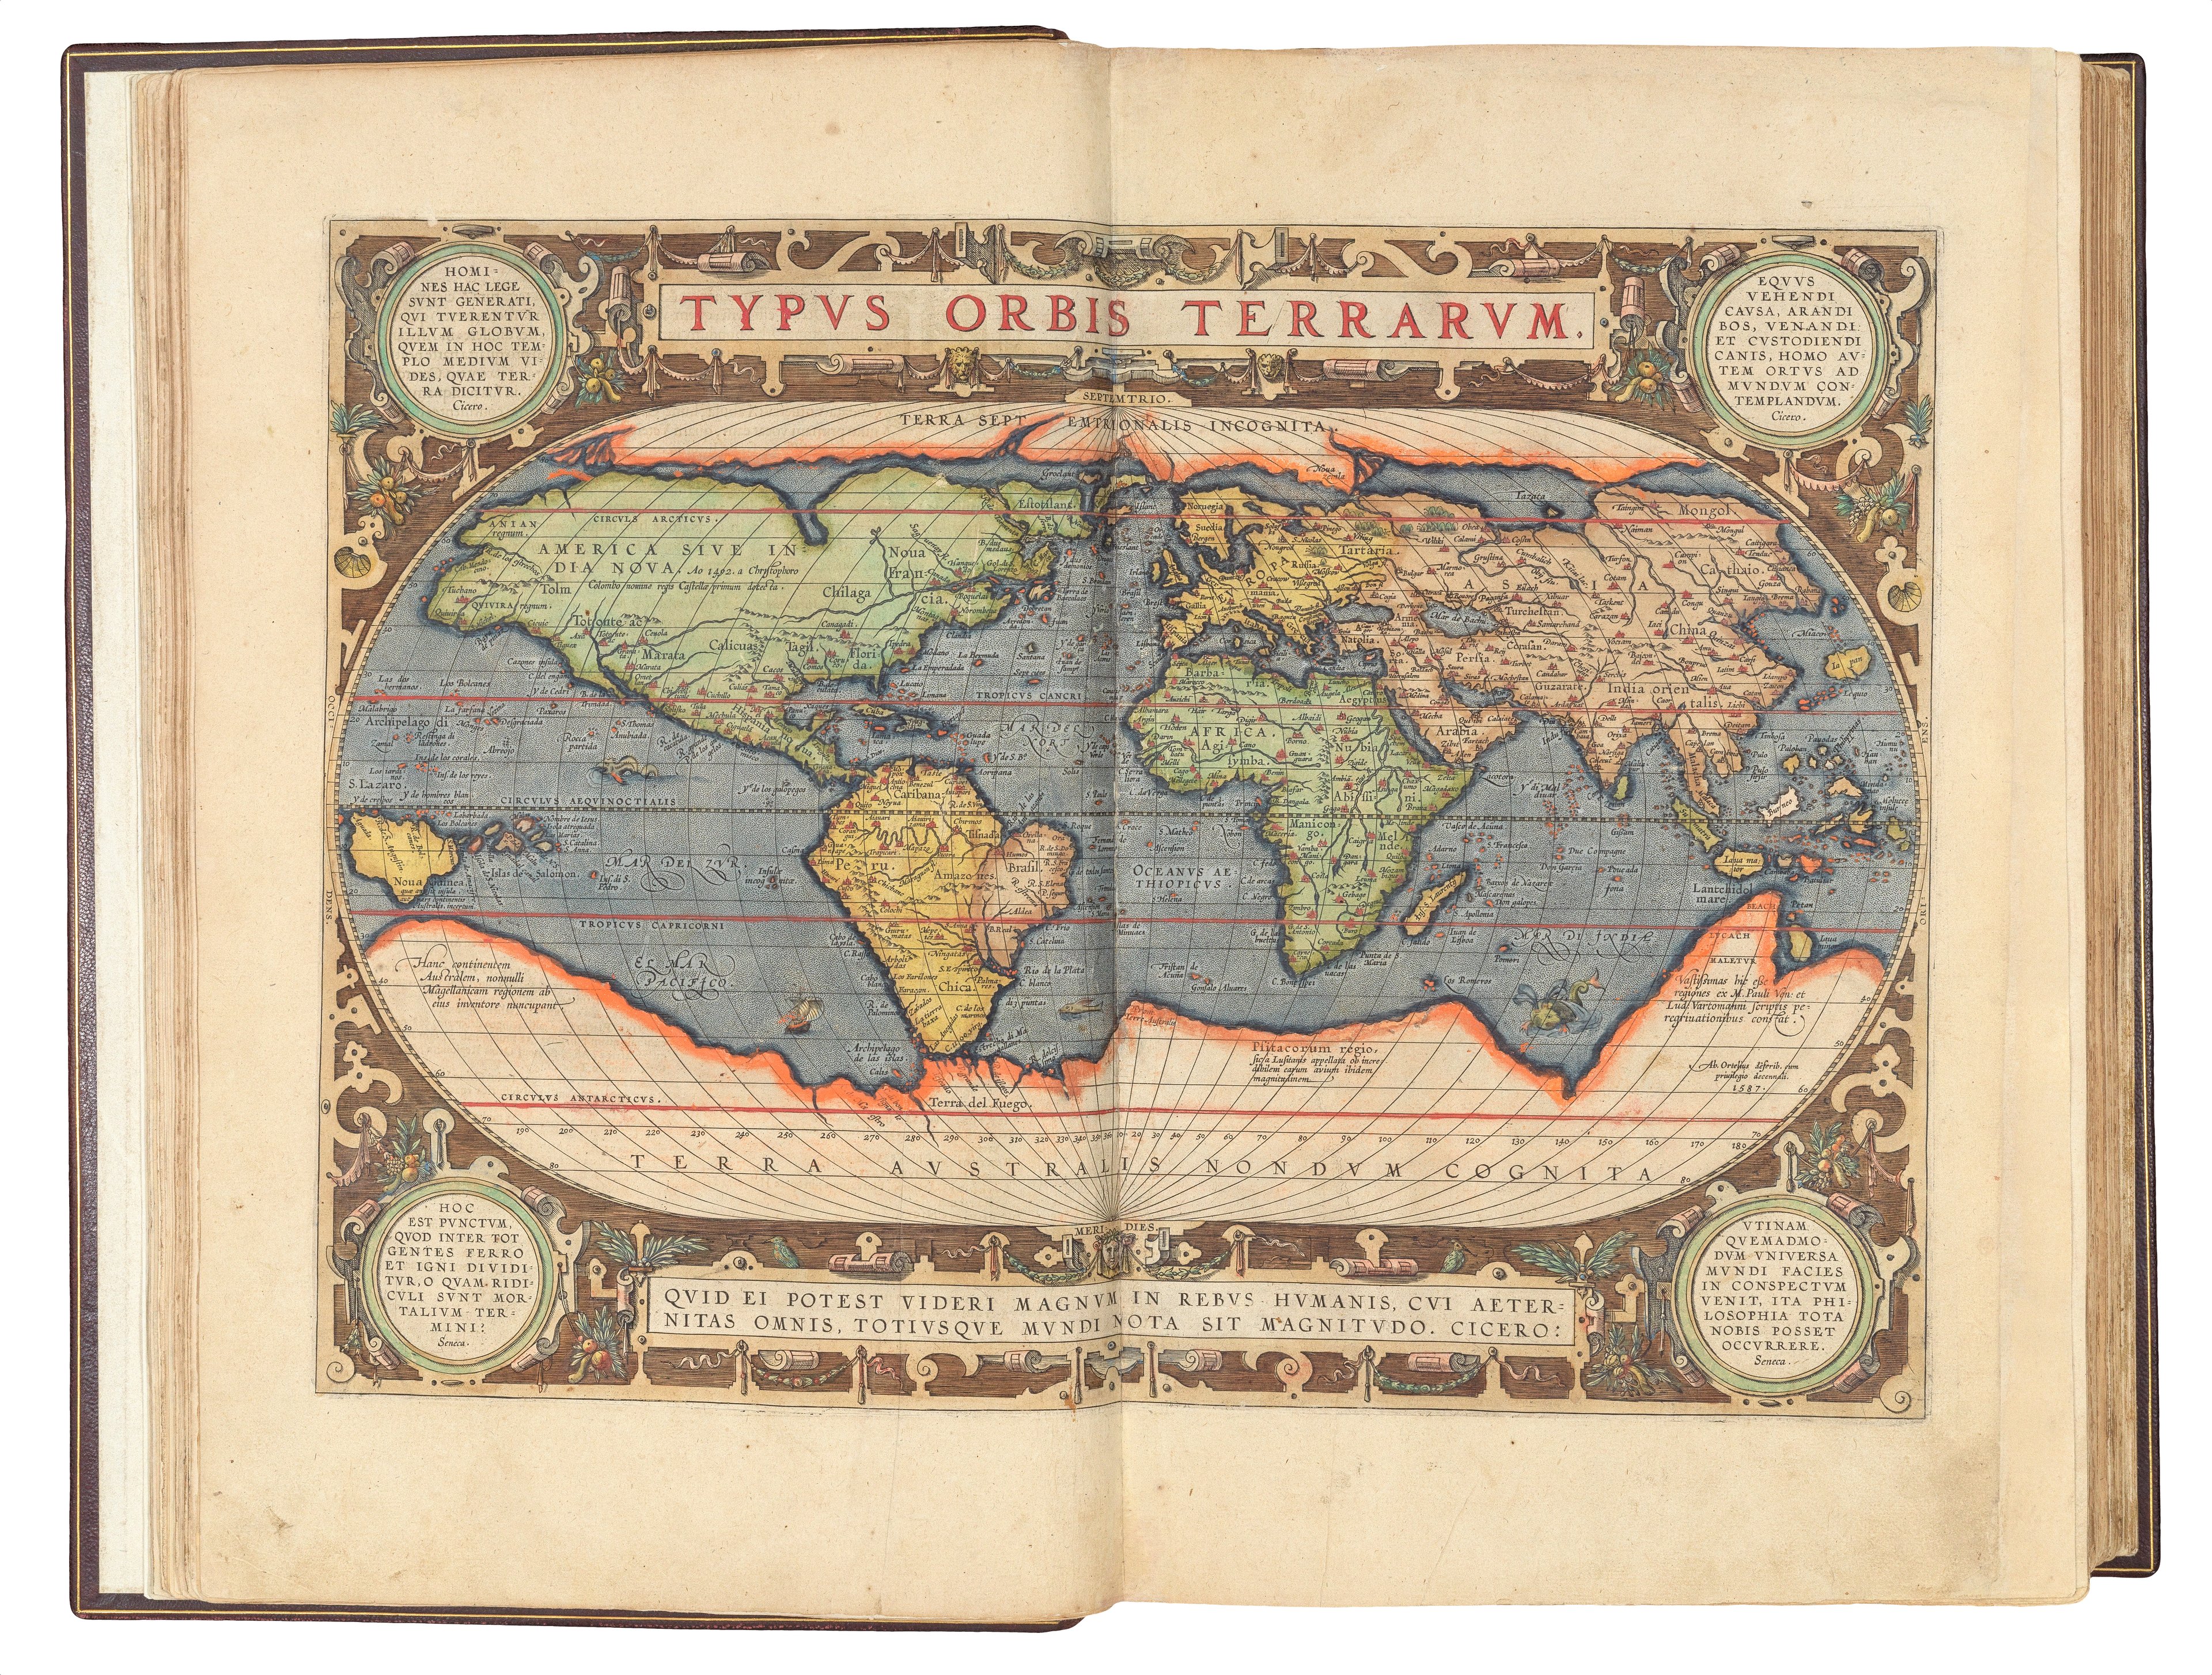 Preview of Hieronymous map of the world, embellished with ornate illustrations and text above the sphere which reads: Typvs Orbis Terrarvm